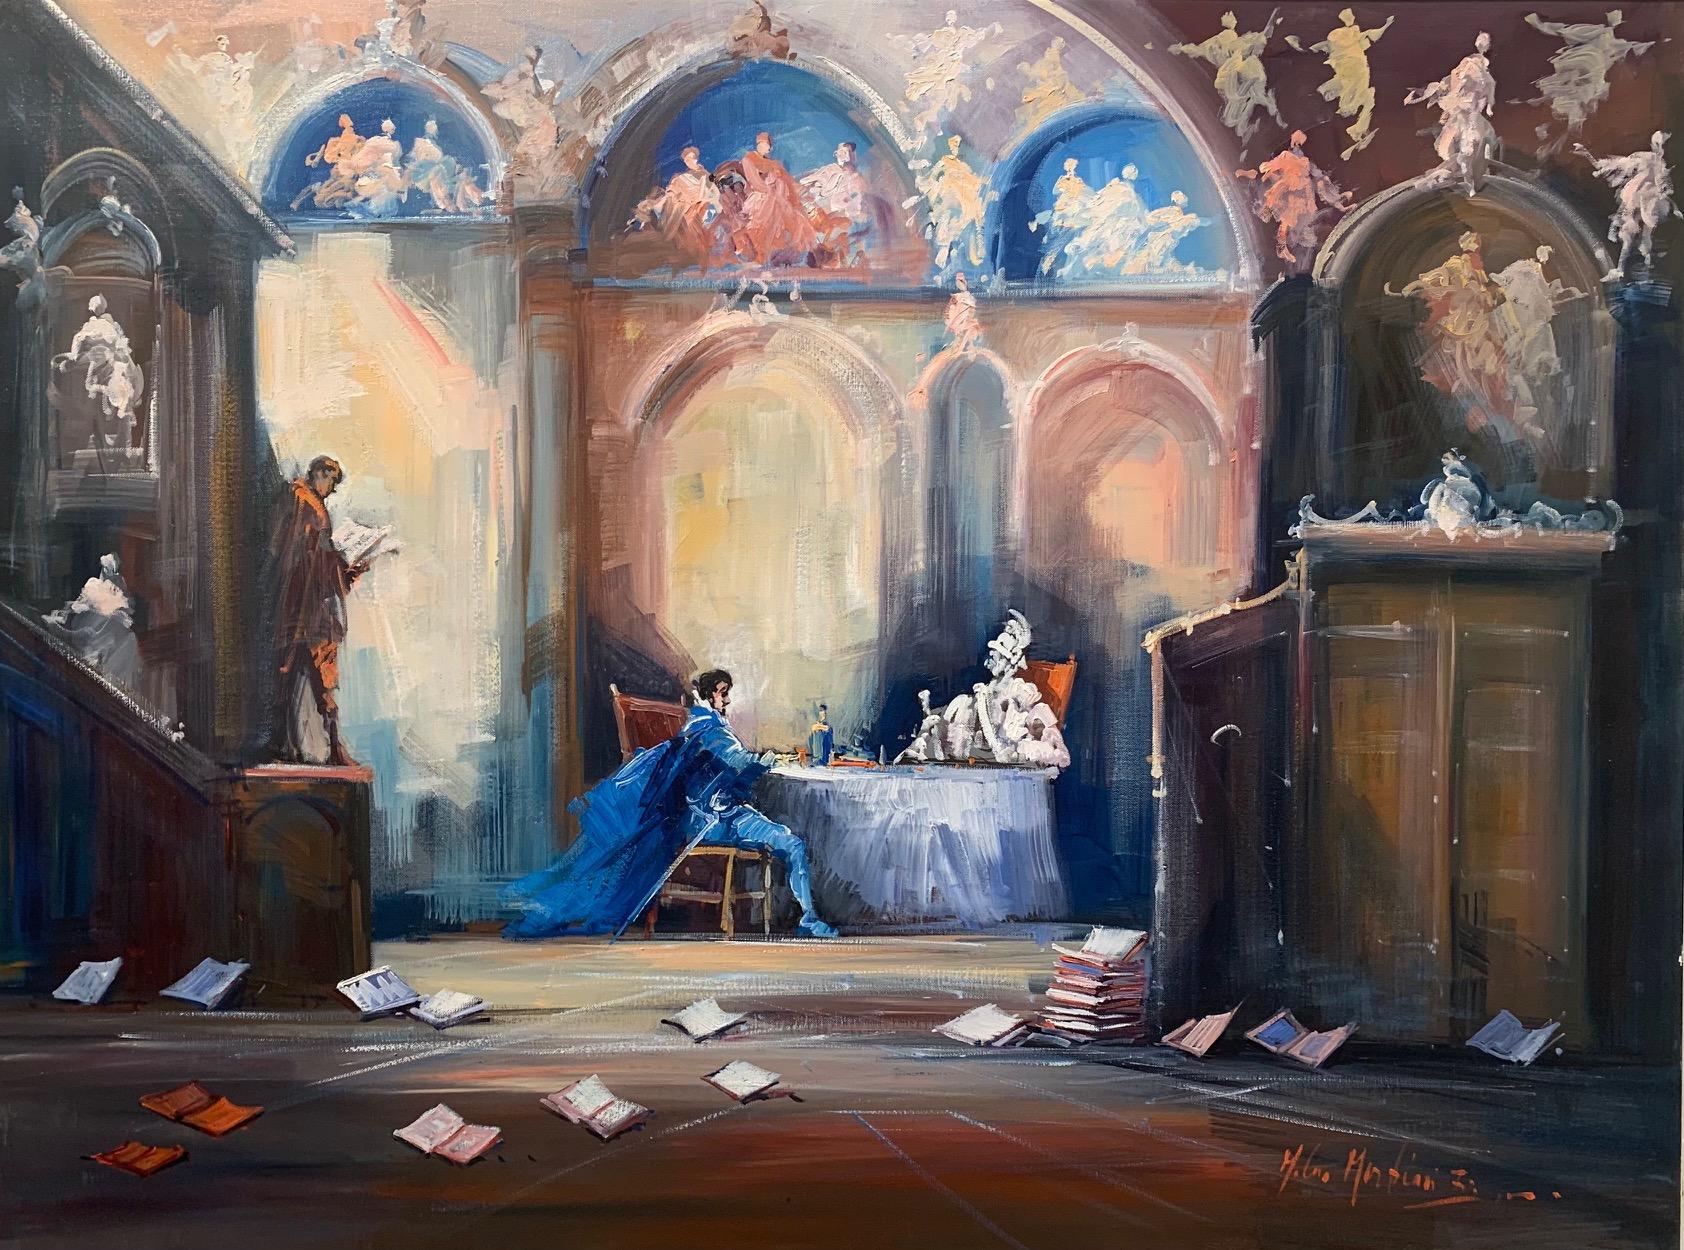 Norberto Martini (1940-2007)
From his studio on the Arno, dressed in a three-piece suit, Martini brought his experiences of his time singing opera coupled with being a devout Catholic to his colorful canvases.
Alter boys dance, play, and get into